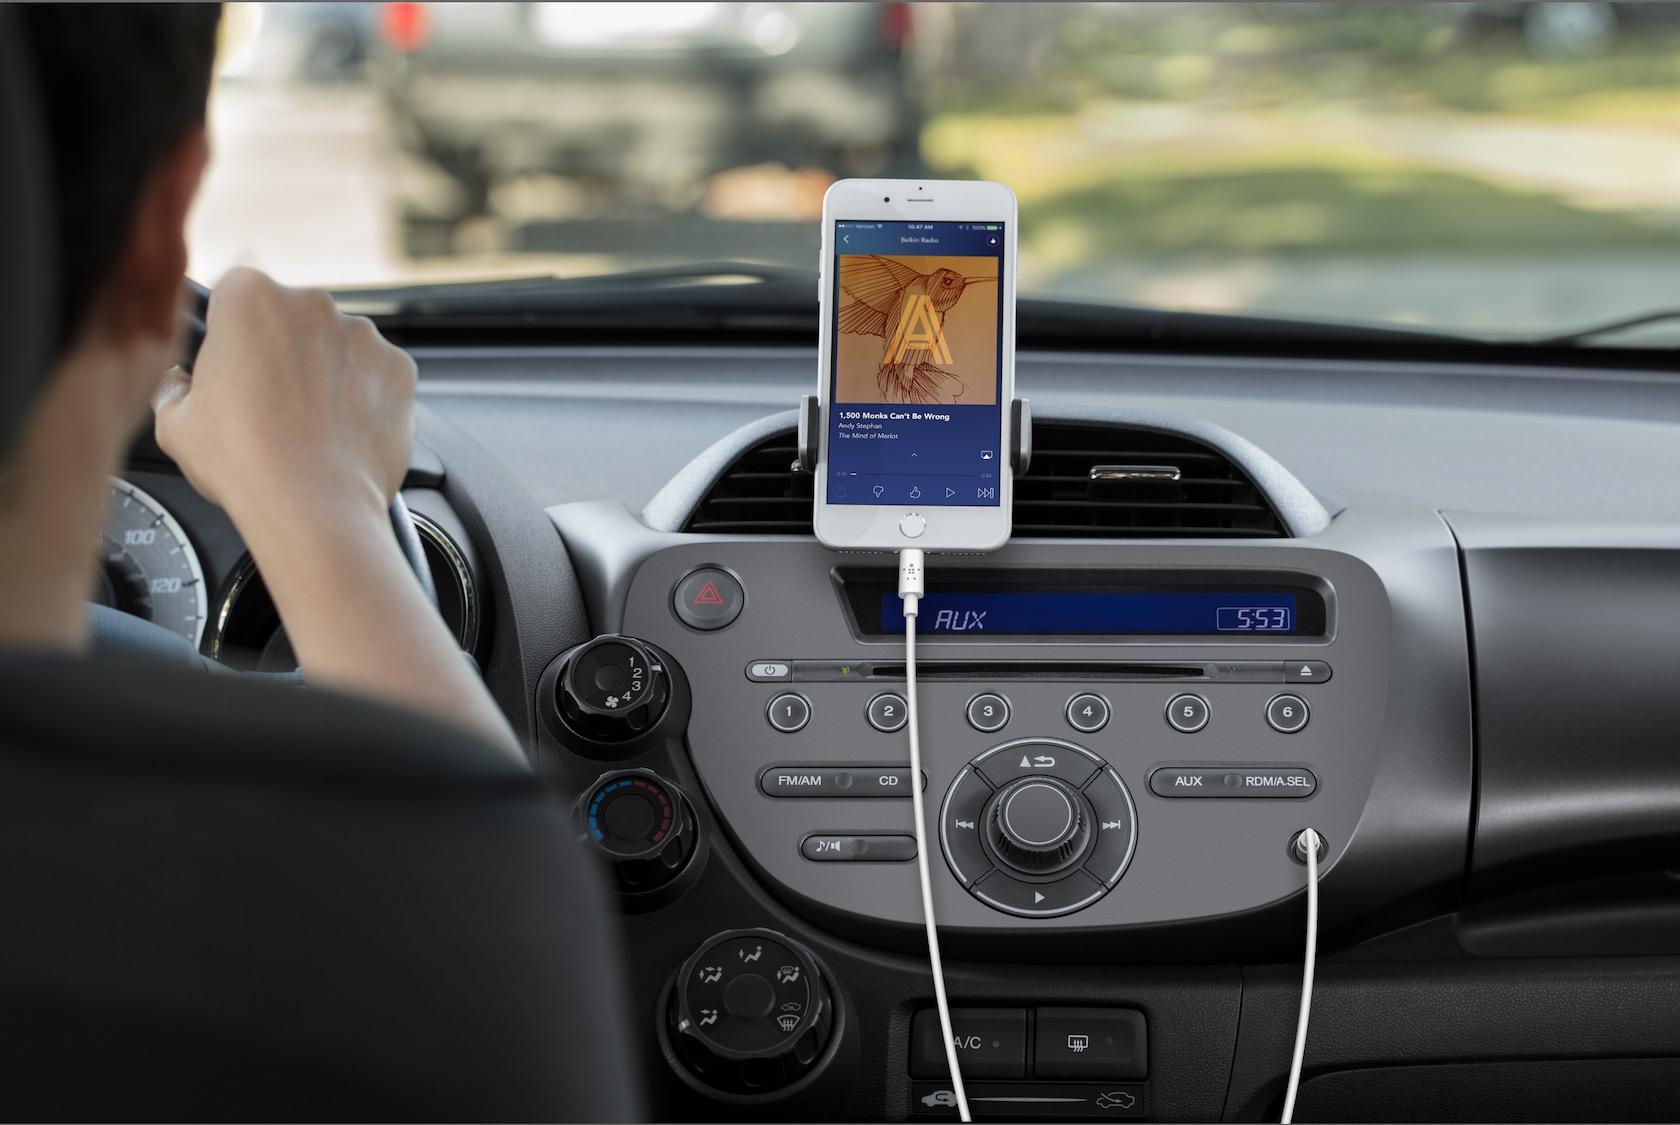 How To Connect My Iphone To Car Speakers